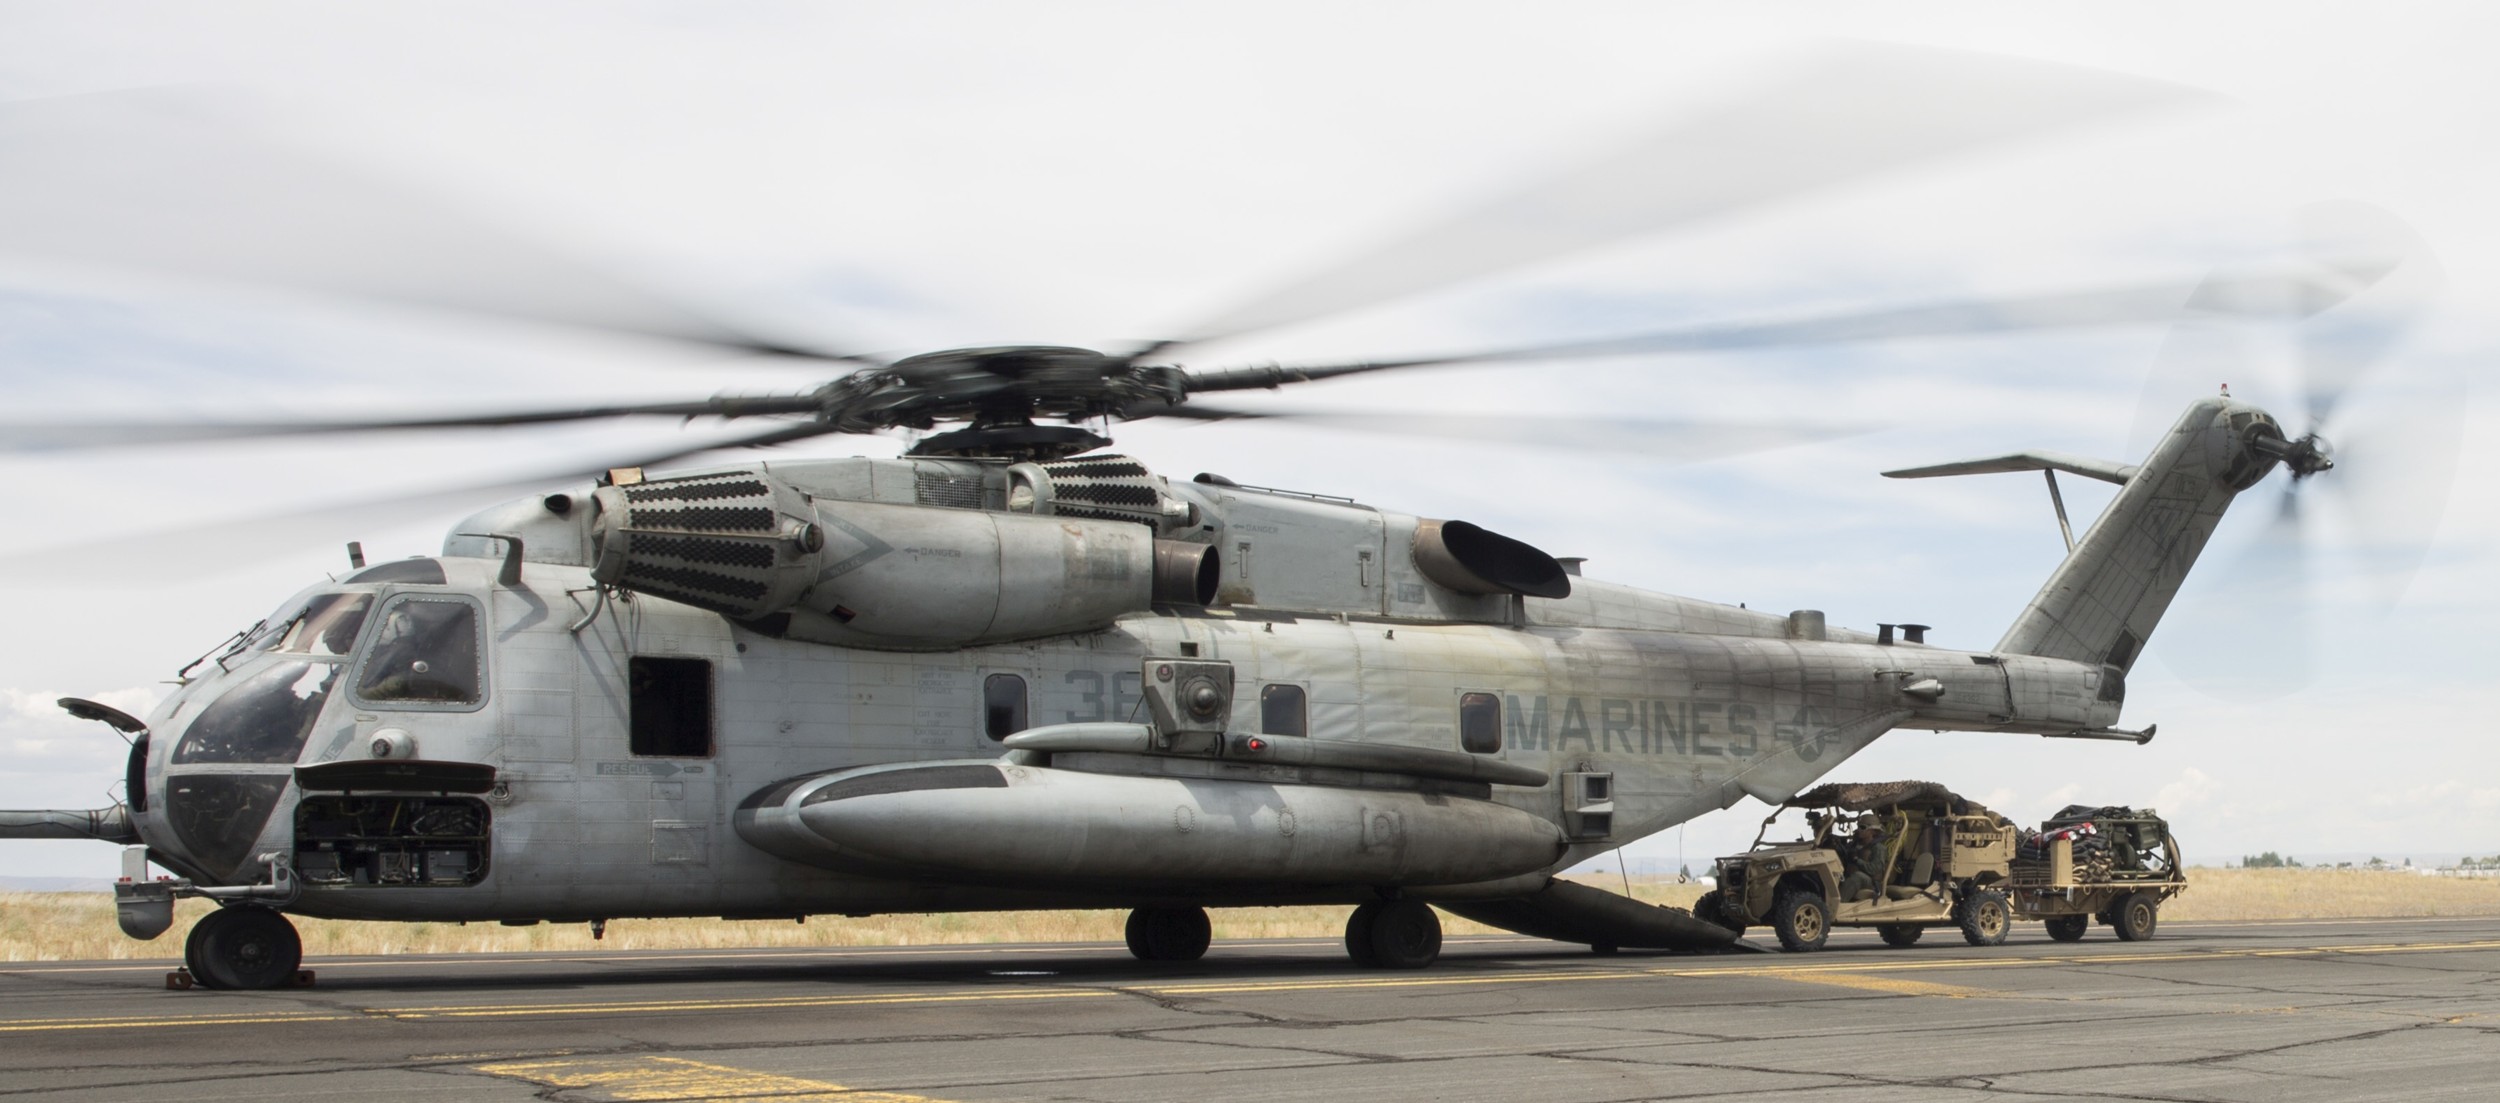 hmh-361 flying tigers marine heavy helicopter squadron usmc sikorsky ch-53e super stallion jb kewis mcchord 51